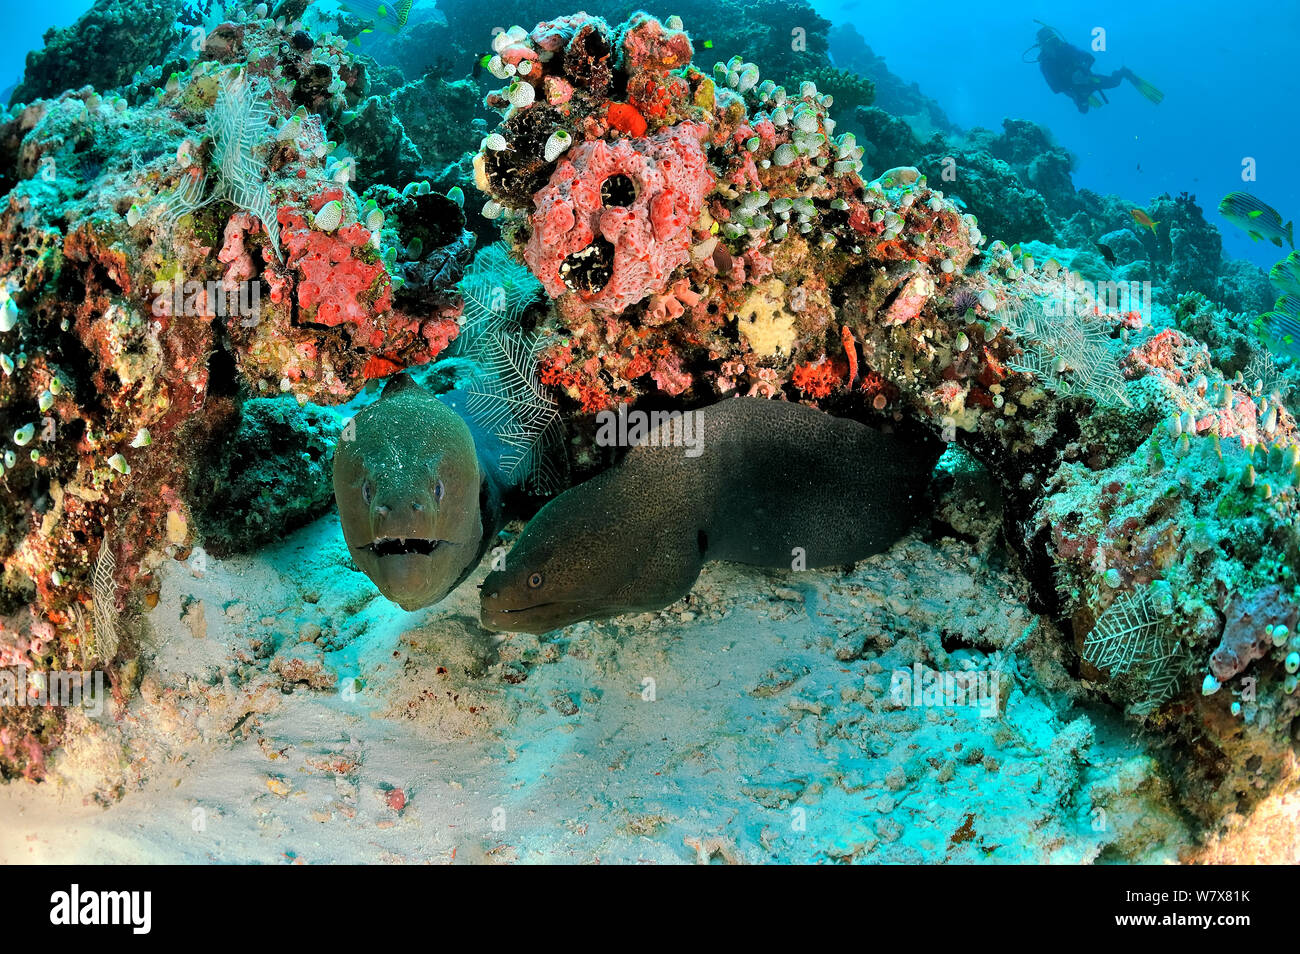 Two Giant morays (Gymnothorax javanicus) coming out of their burrows on coral reef, with Oriental sweetlips (Plectorhinchus orientalis) on background,  Maldives. Indian Ocean. Stock Photo